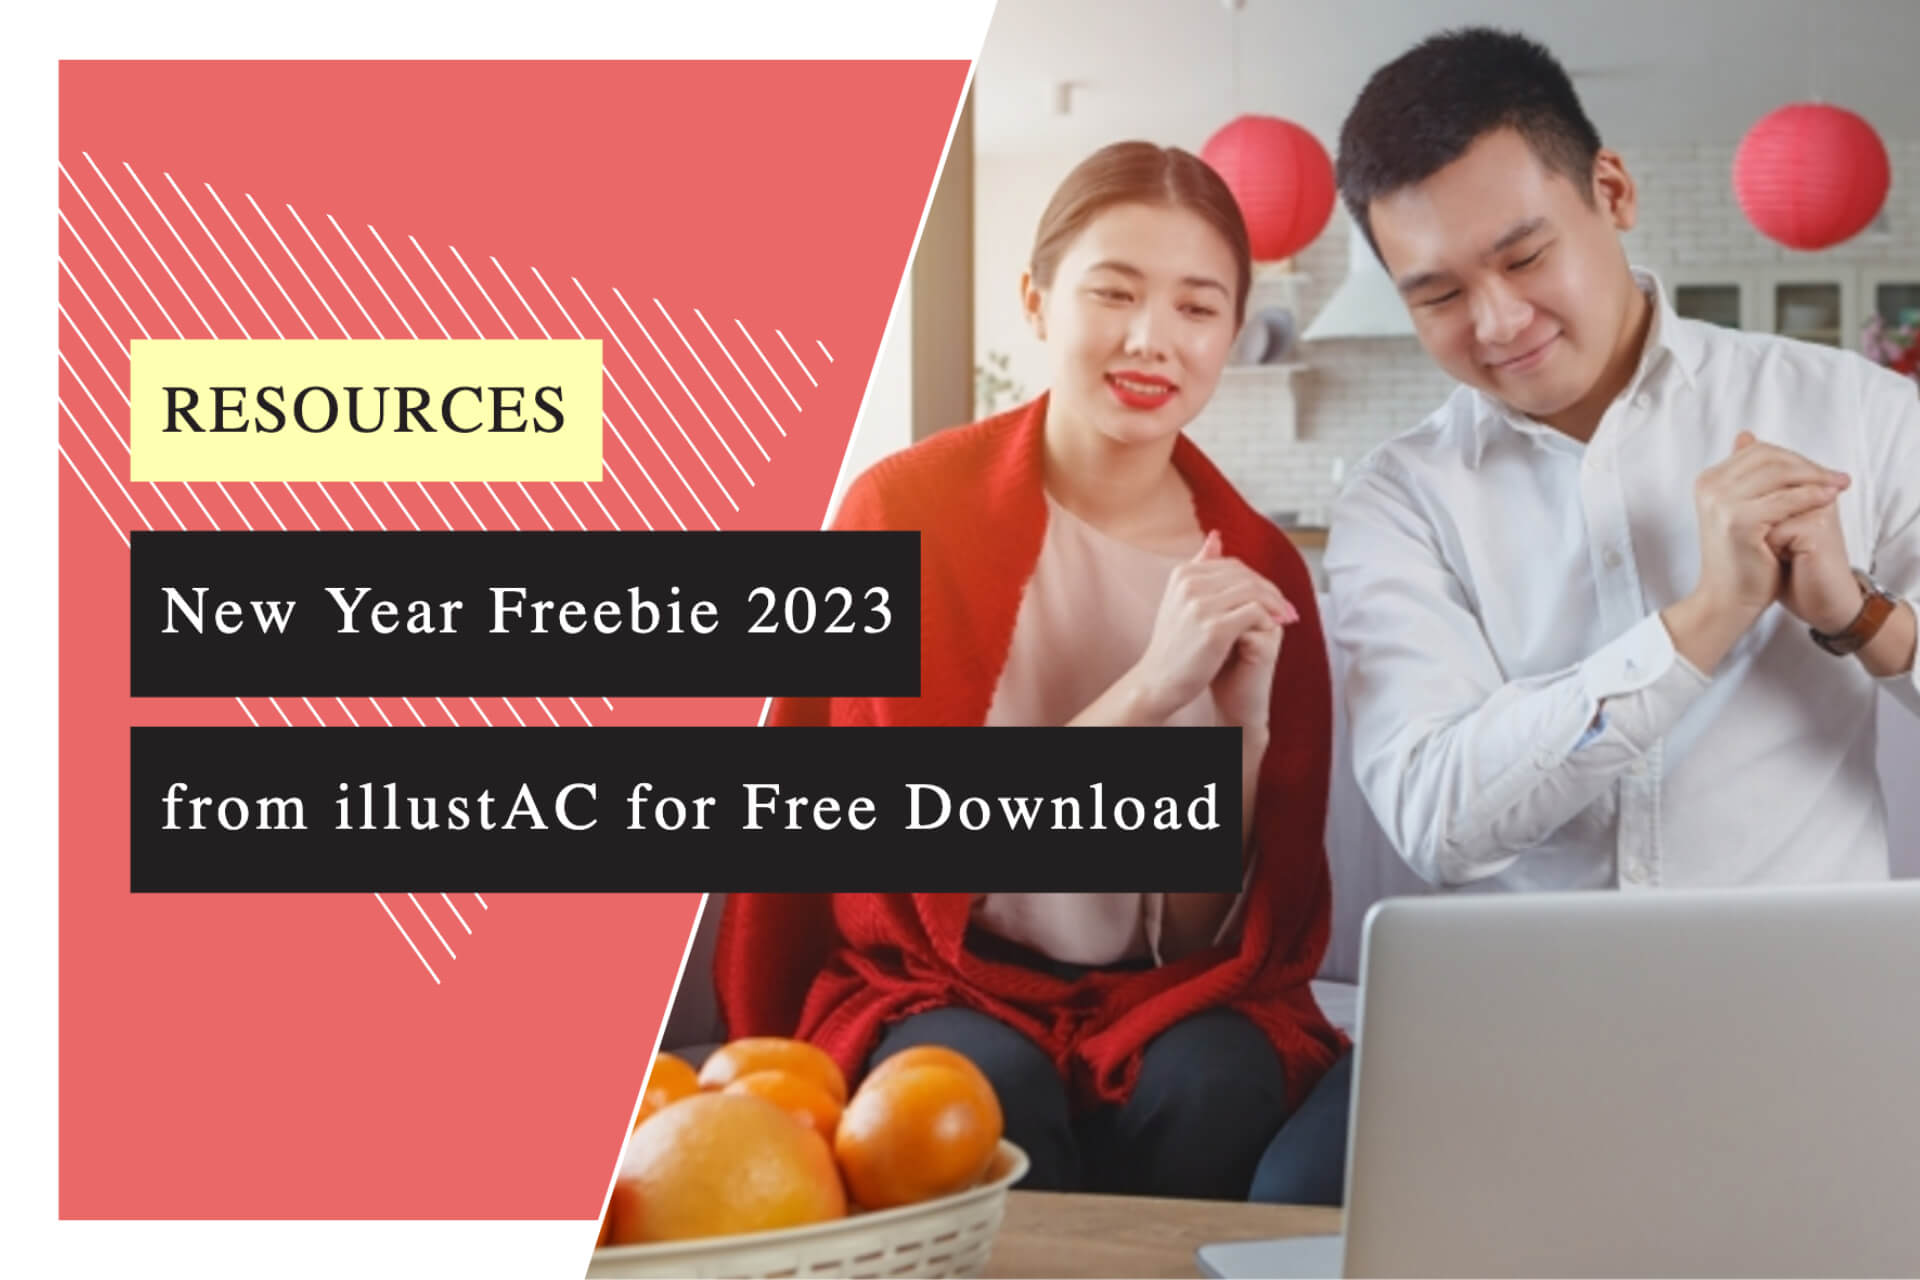 New Year Freebie 2023 from illustAC for Free Download